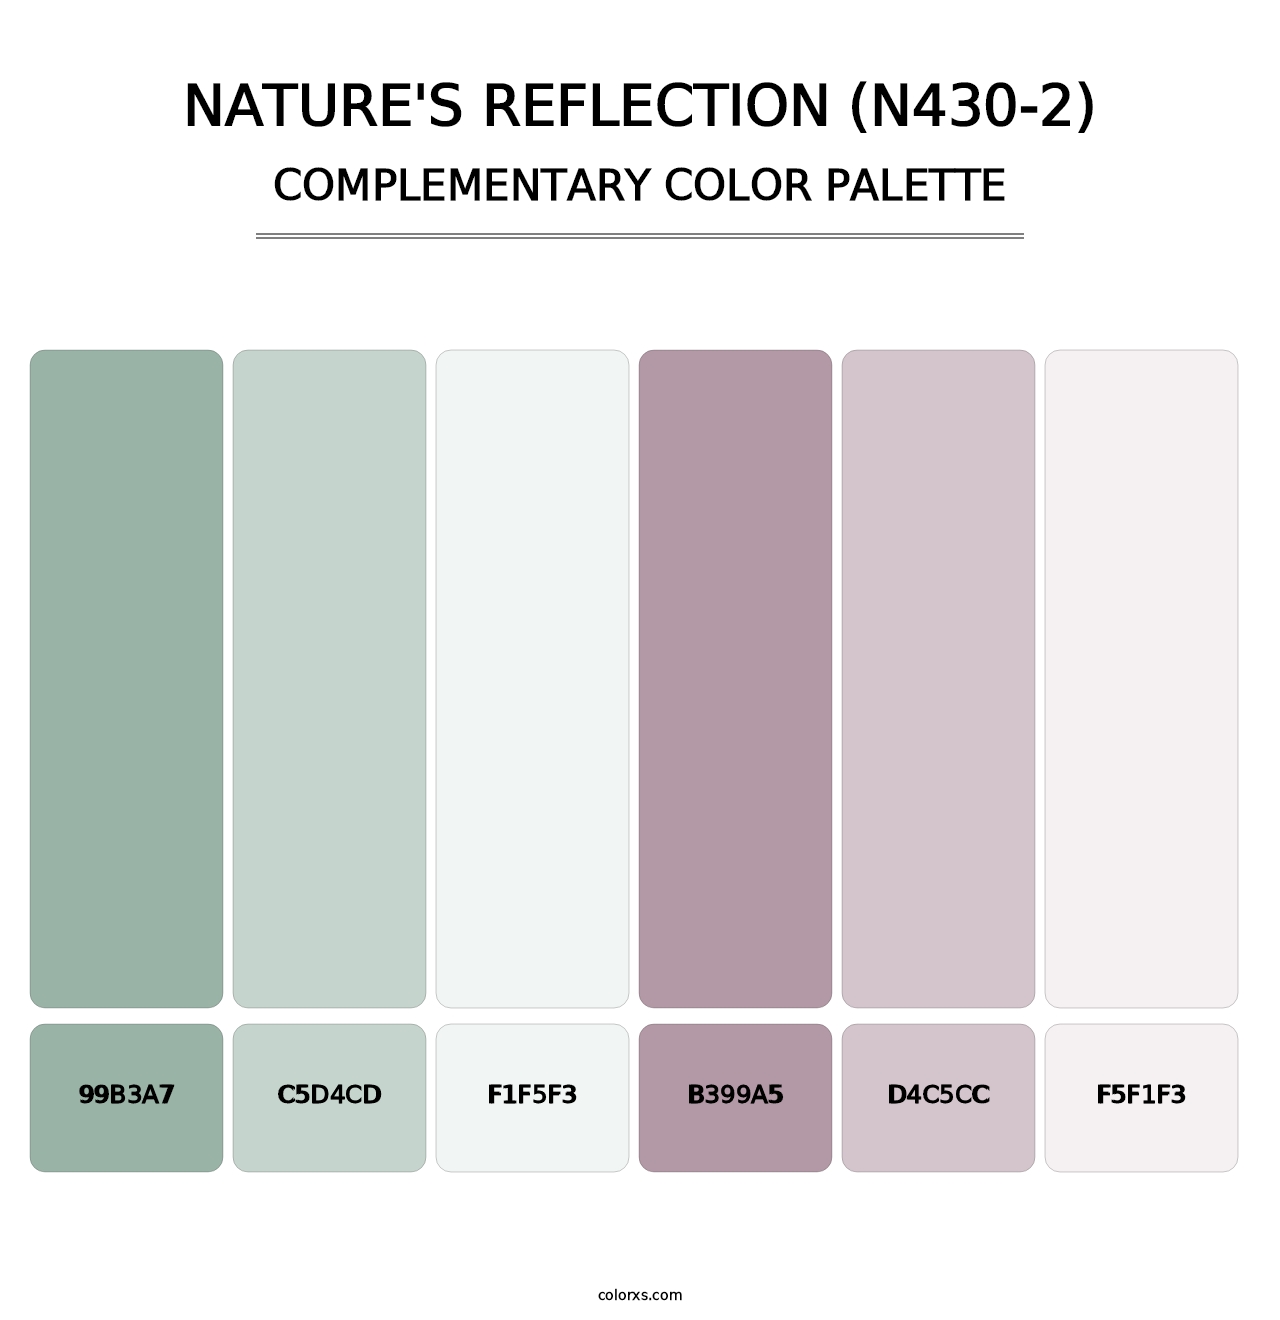 Nature'S Reflection (N430-2) - Complementary Color Palette